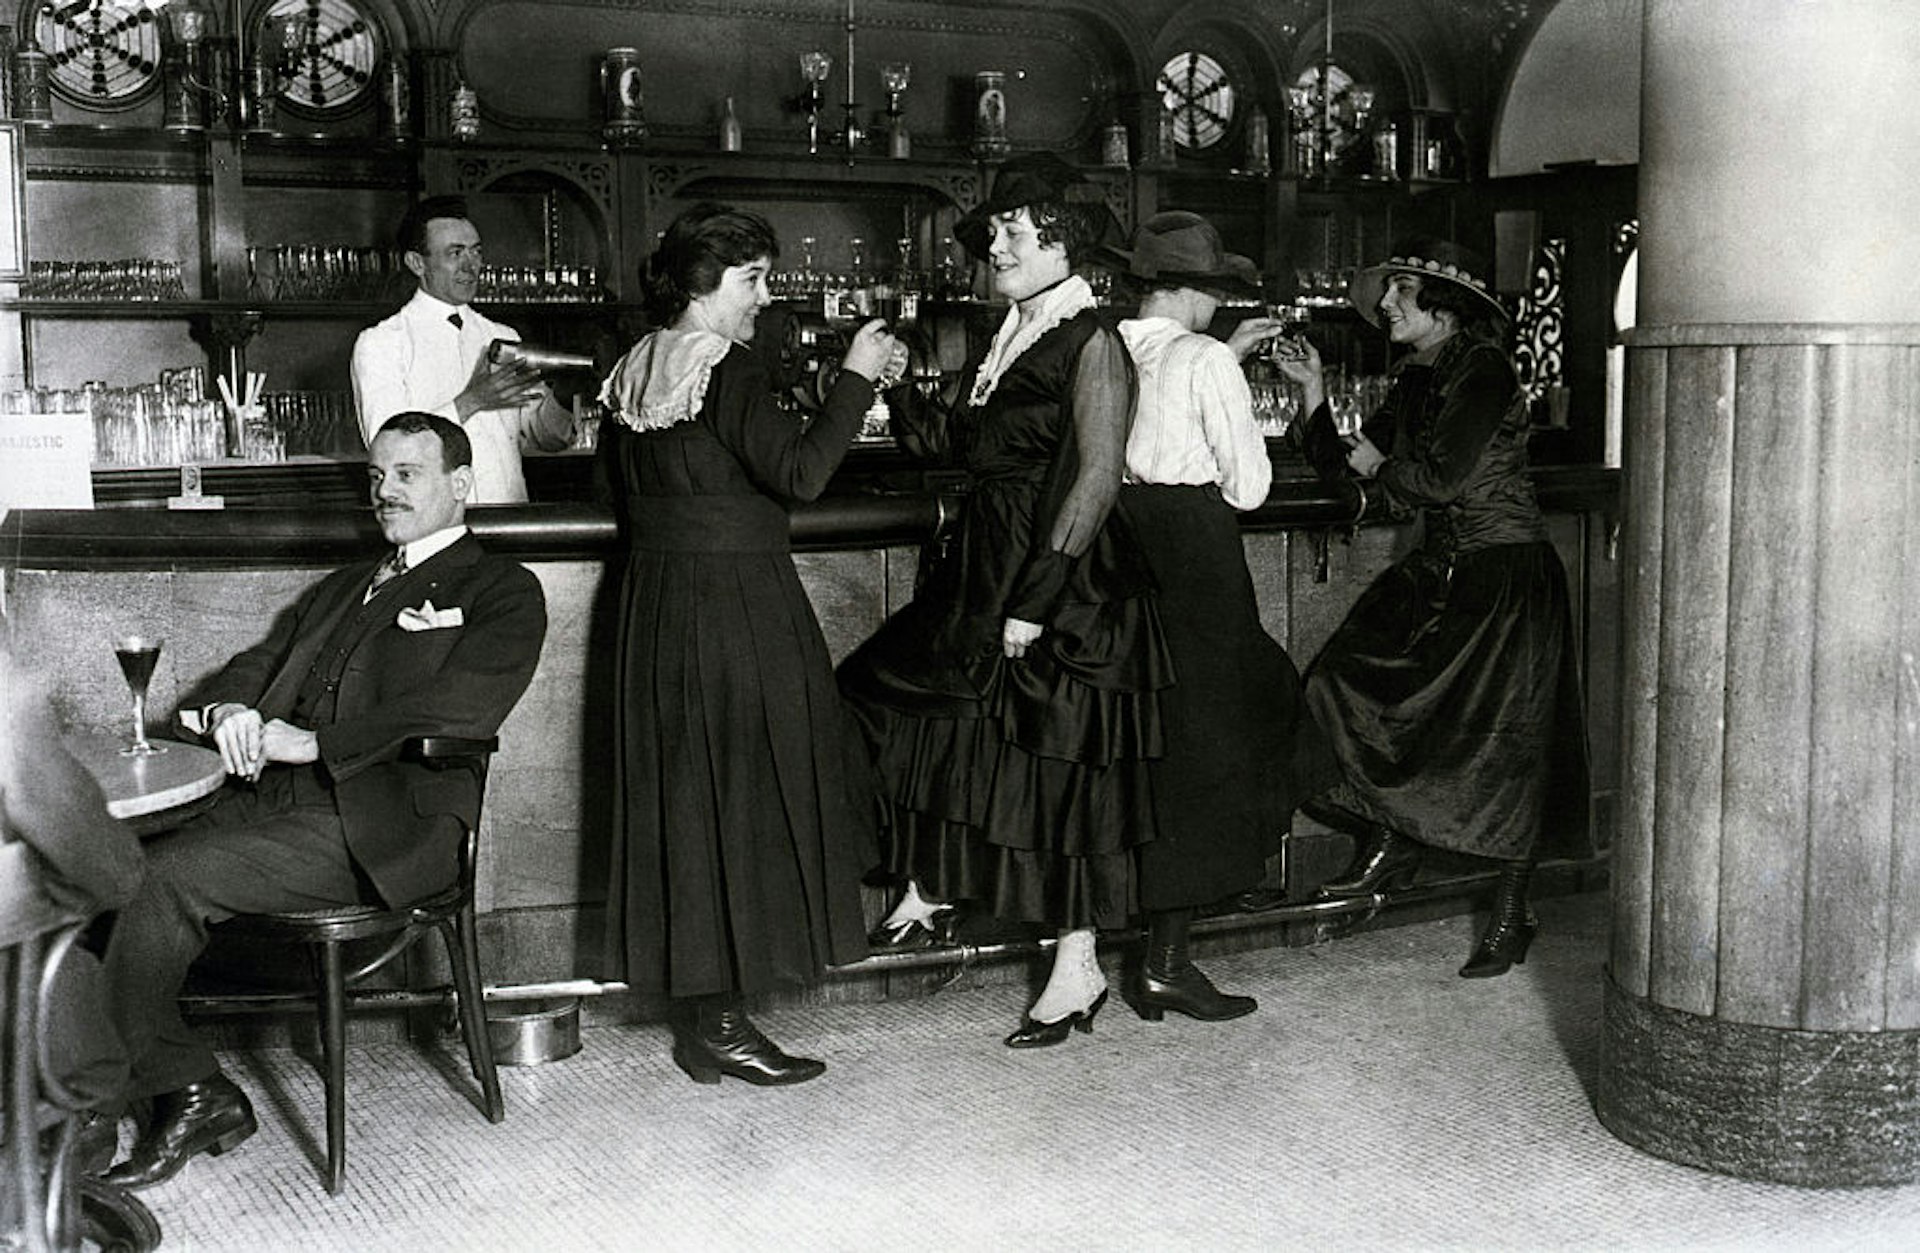 Women at bar in the Hotel Majestic in New York City